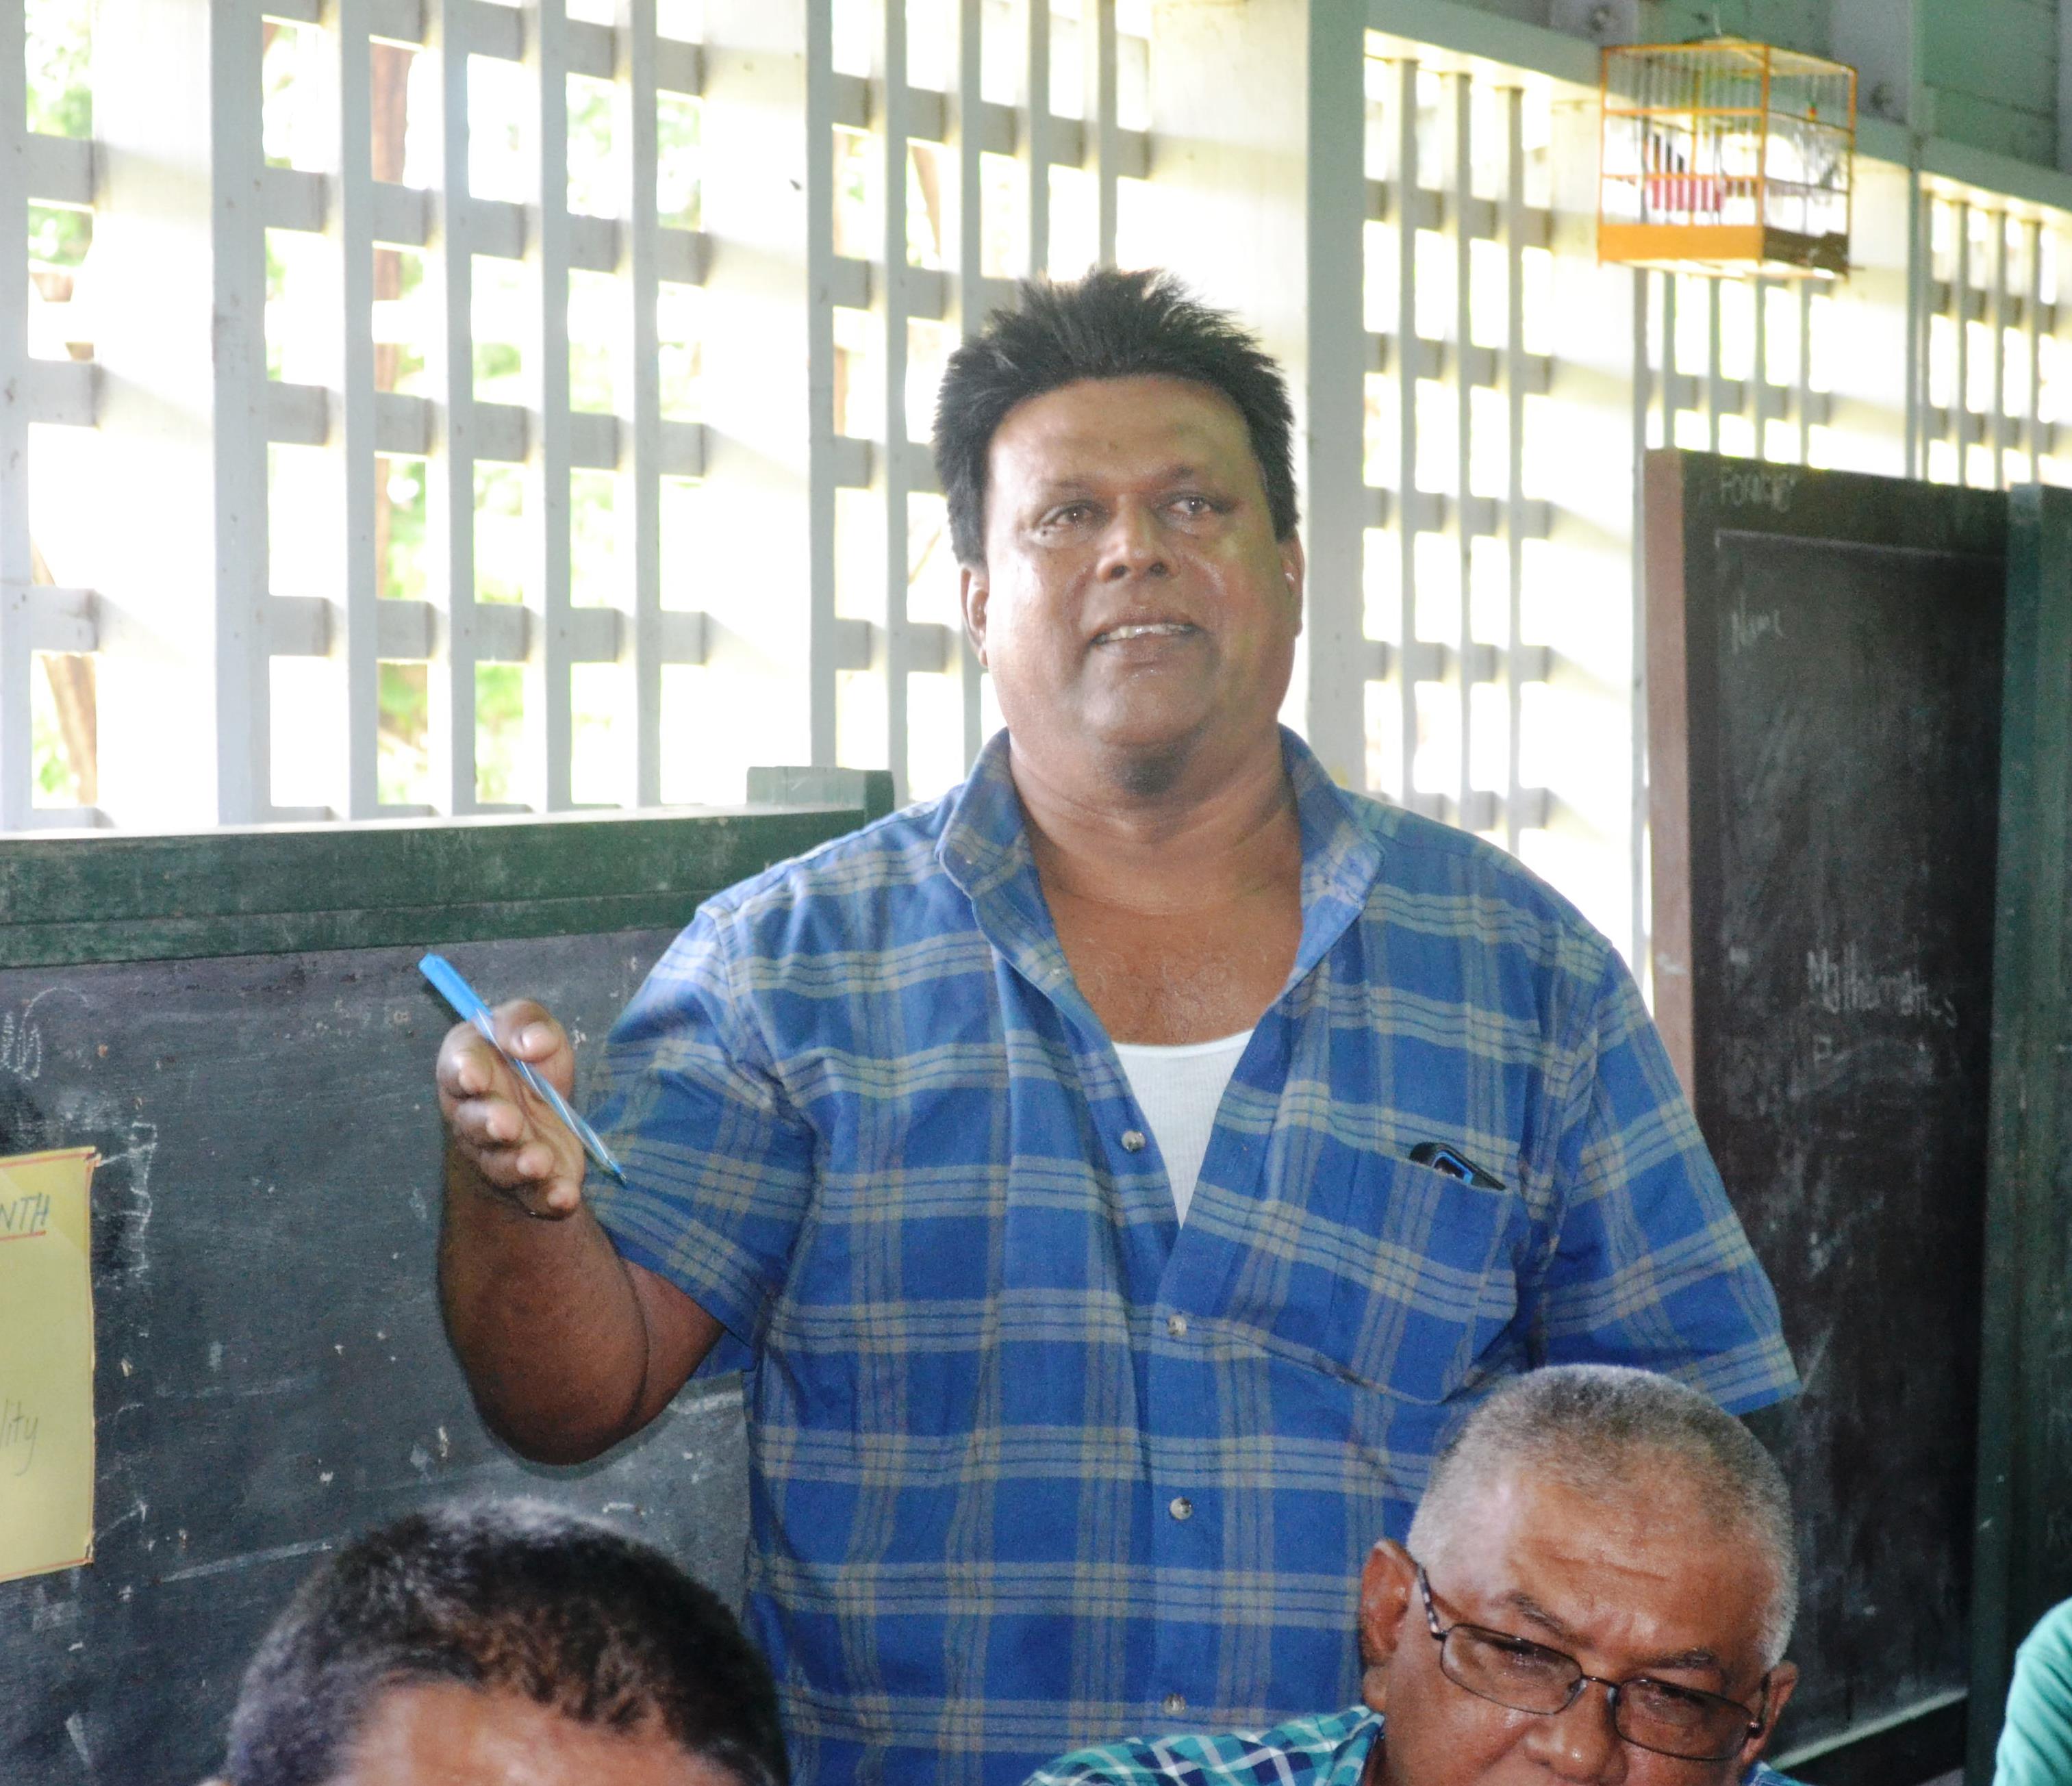 Seerpaul Hemraj, a rice farmer while offering his thoughts on aerial spraying